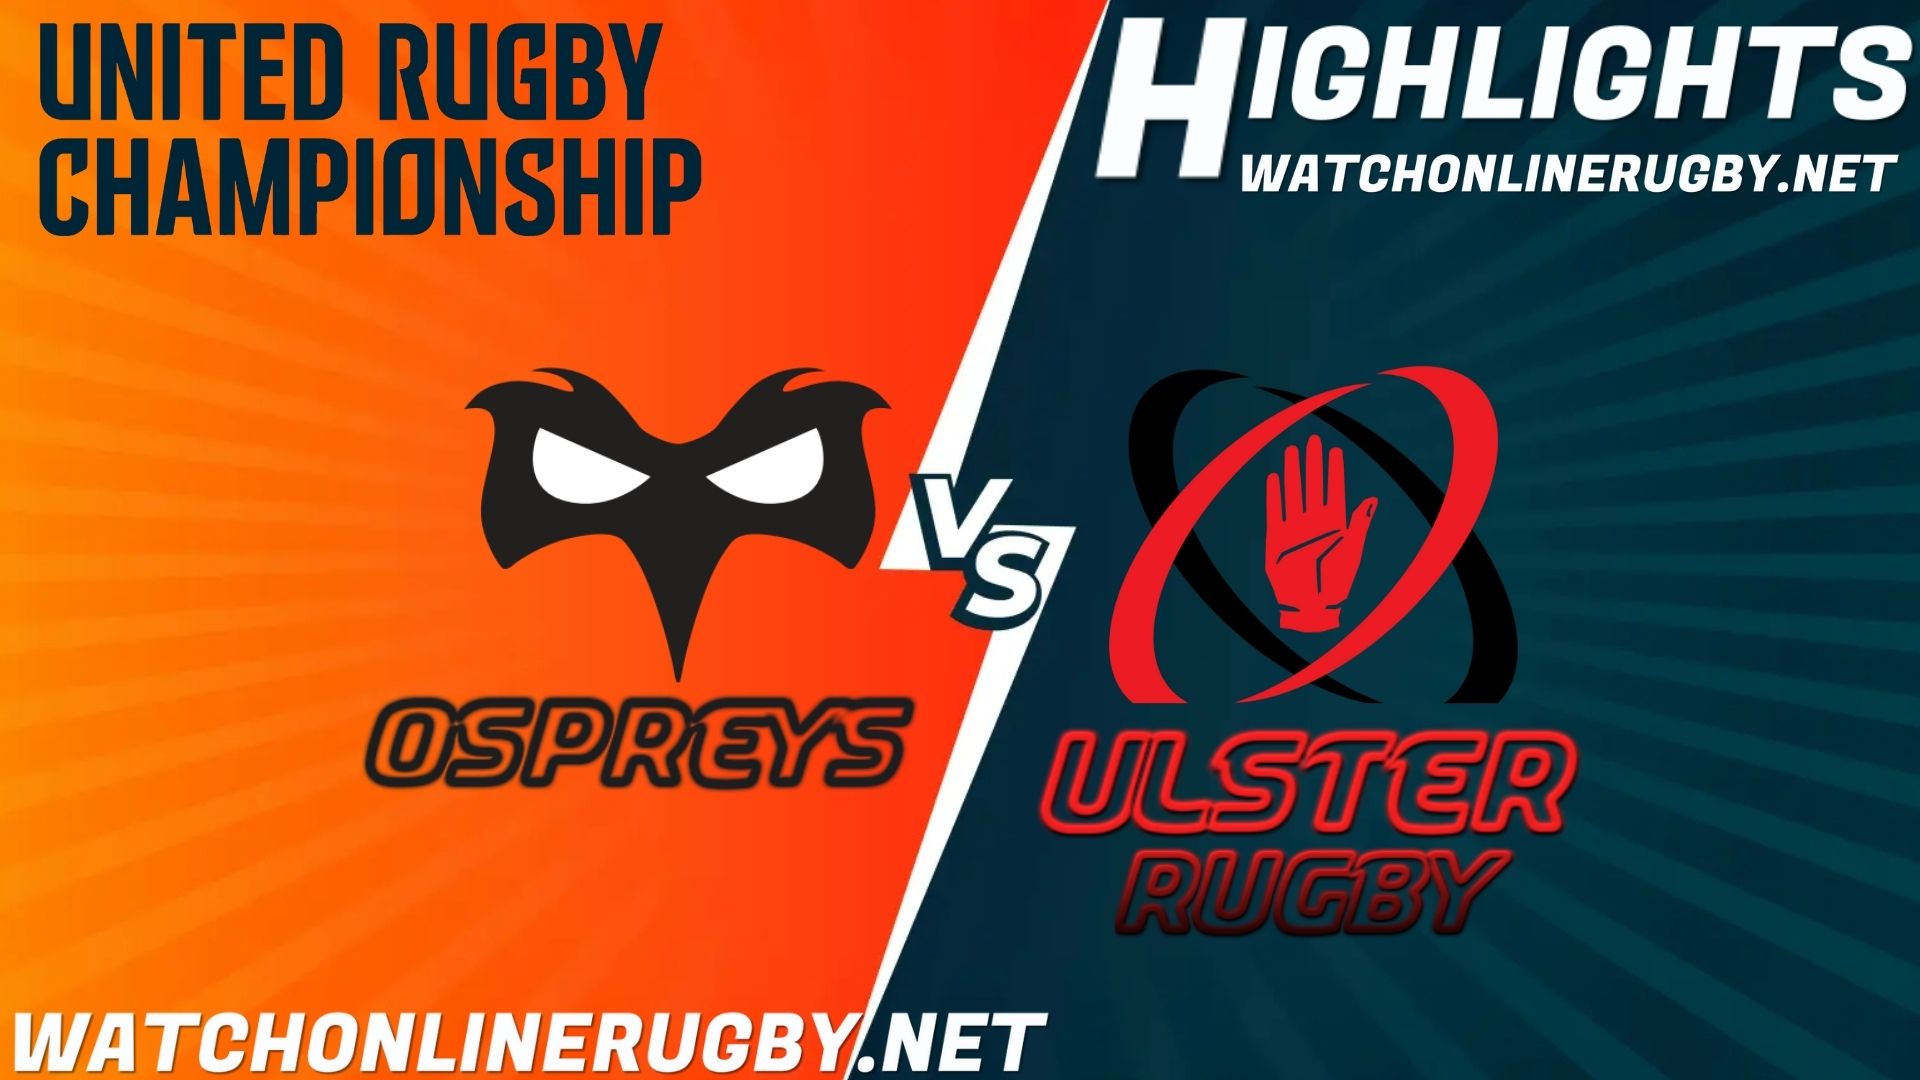 Ospreys Vs Ulster Rugby United Rugby Championship 2021 RD 7